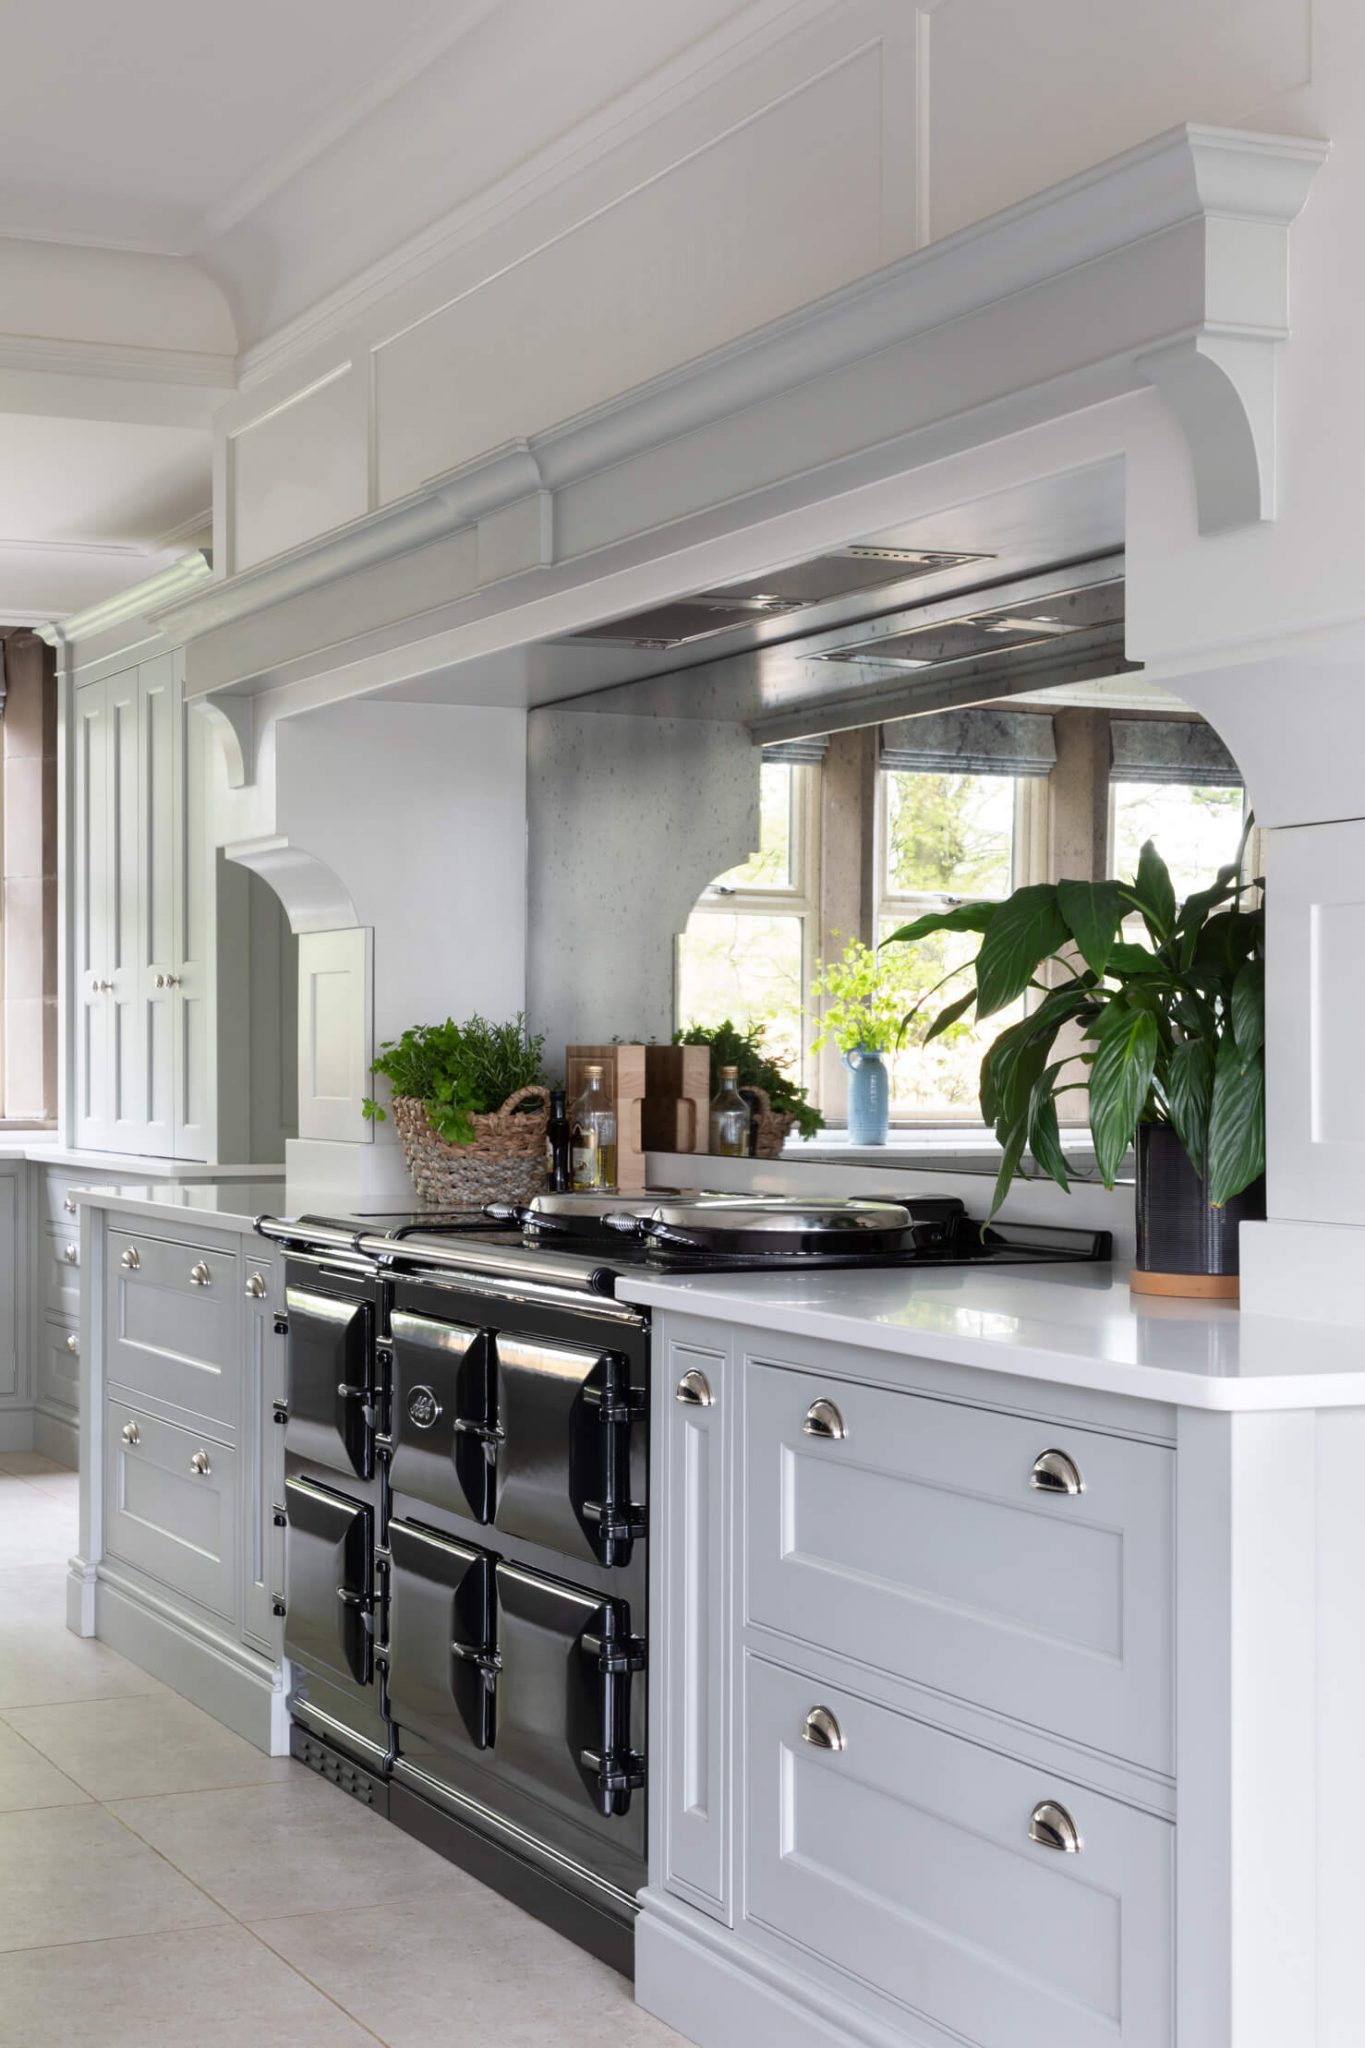 A high-range stove cooker in a Georgian kitchen, surrounded by a chimney and bespoke cabinetry, with a mirrored splashback.